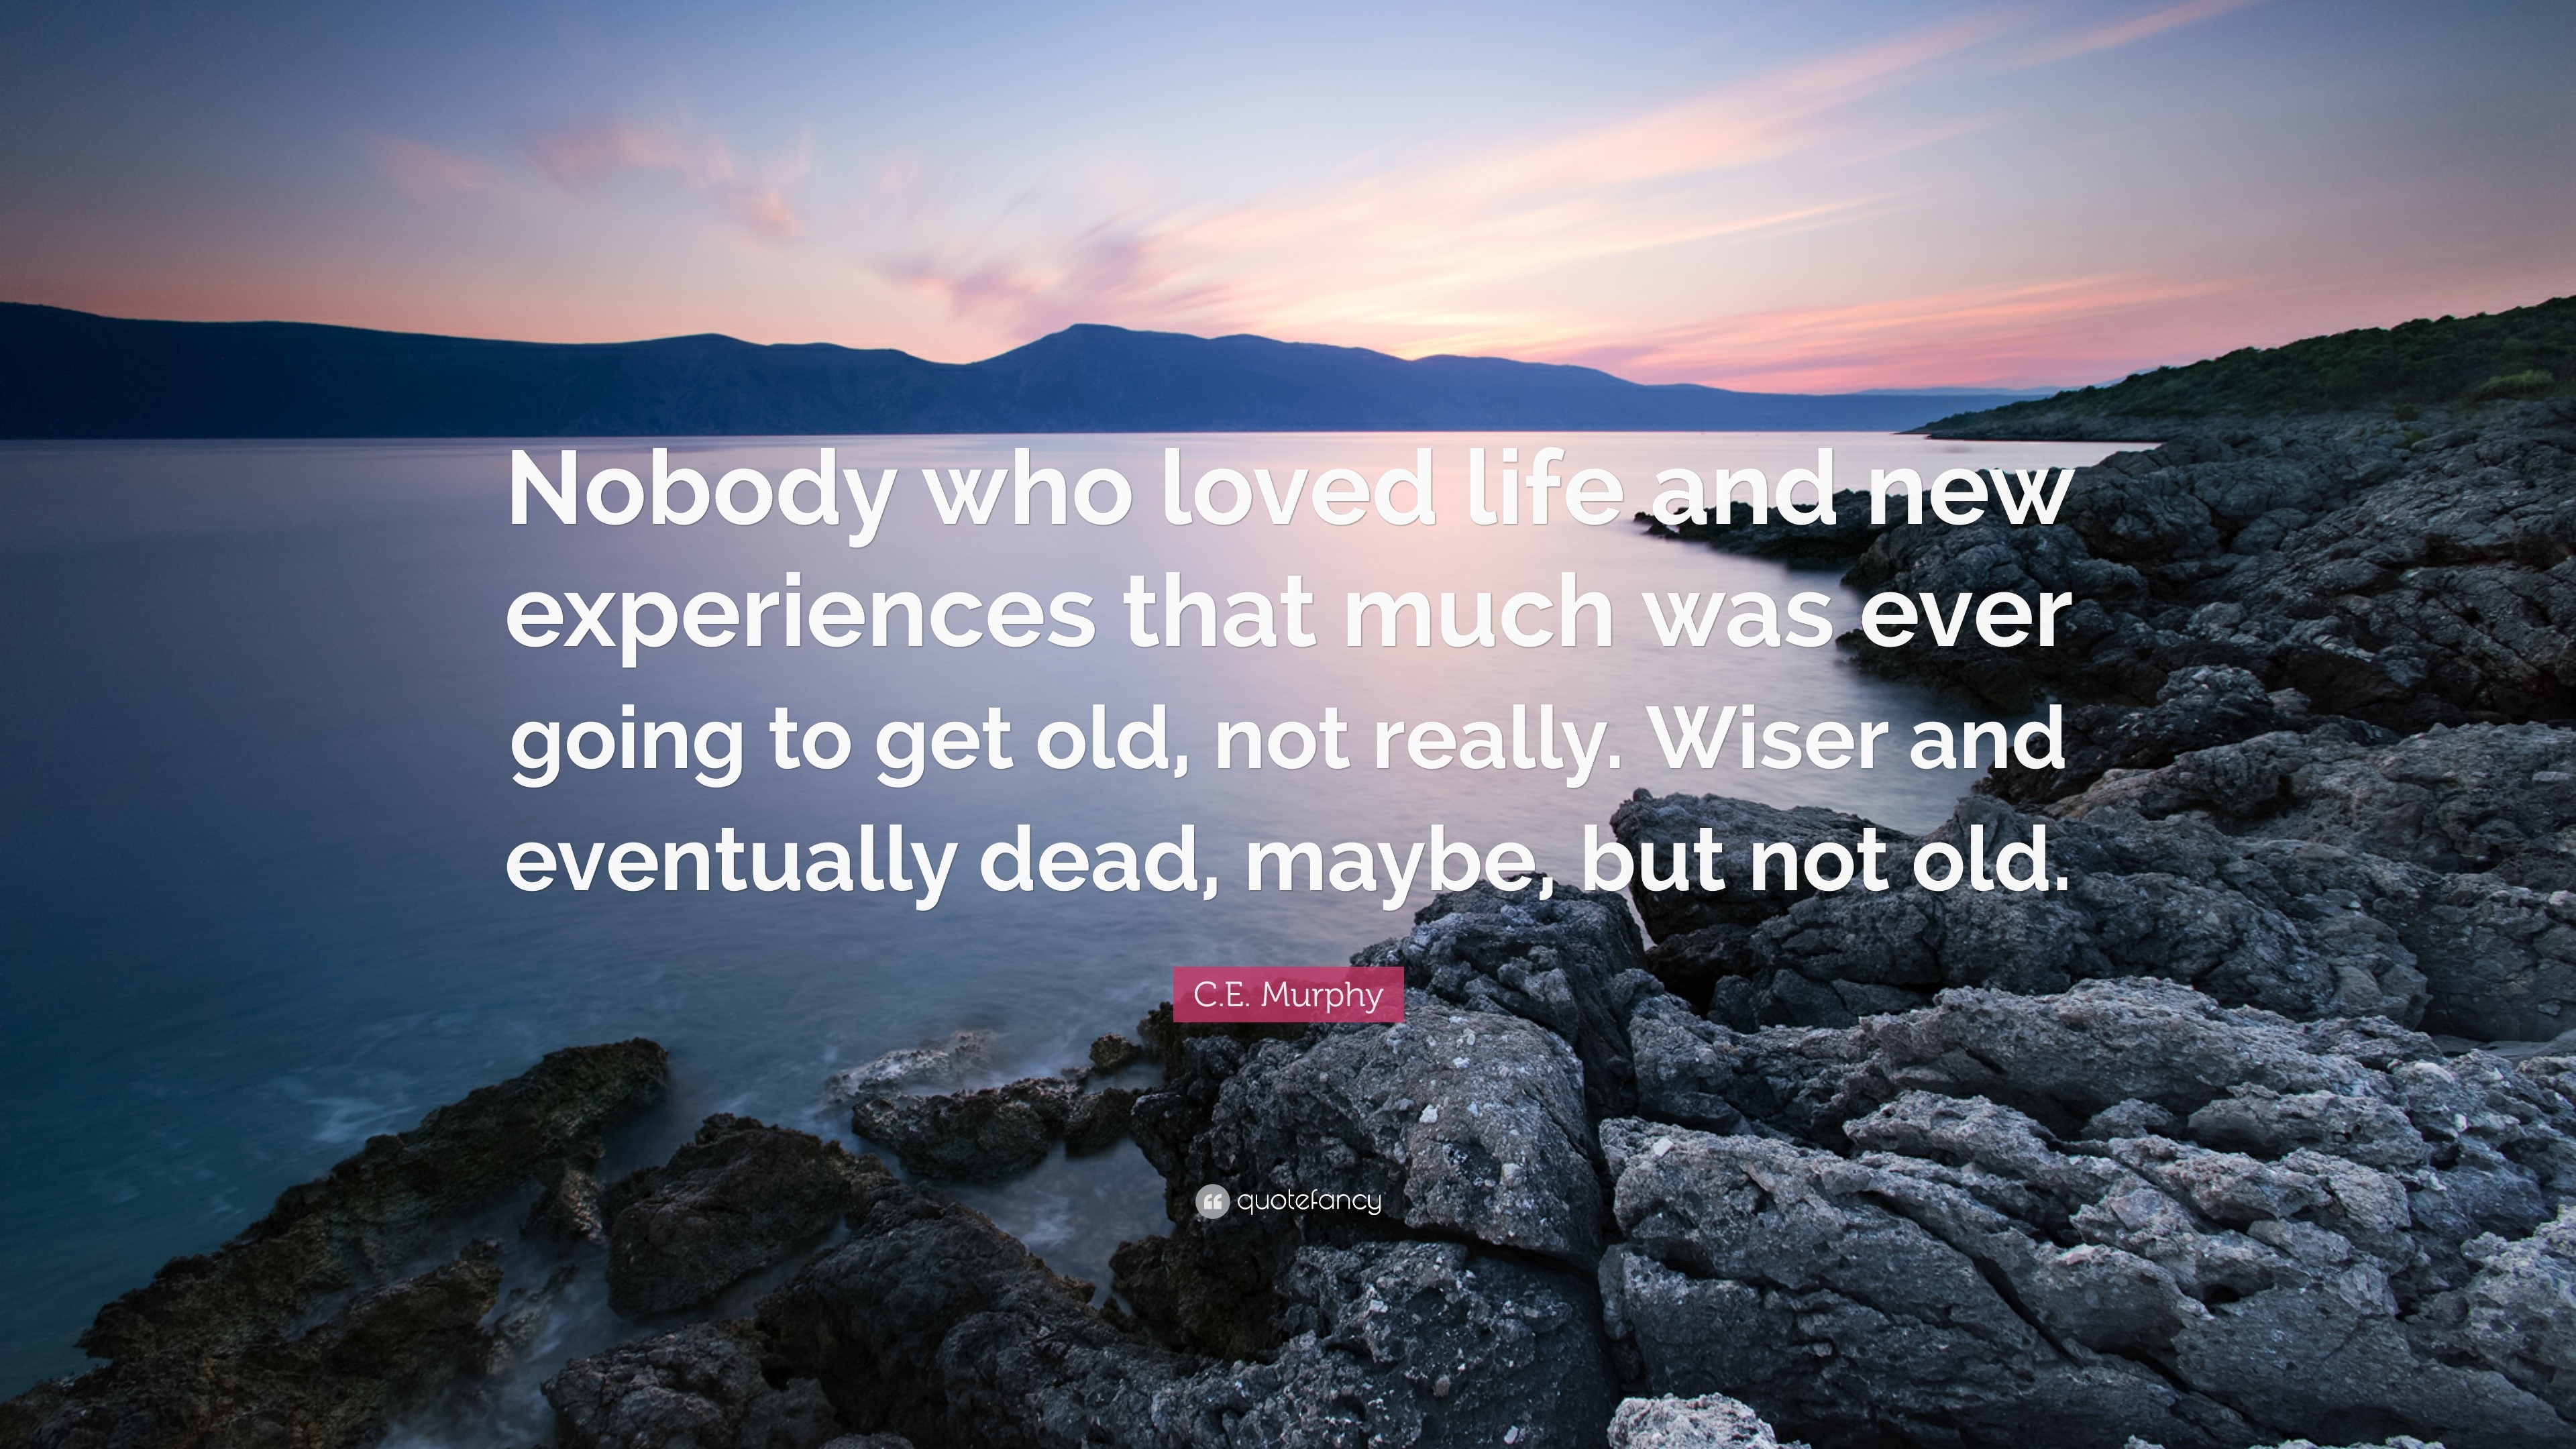 C E Murphy Quote “Nobody who loved life and new experiences that much was ever